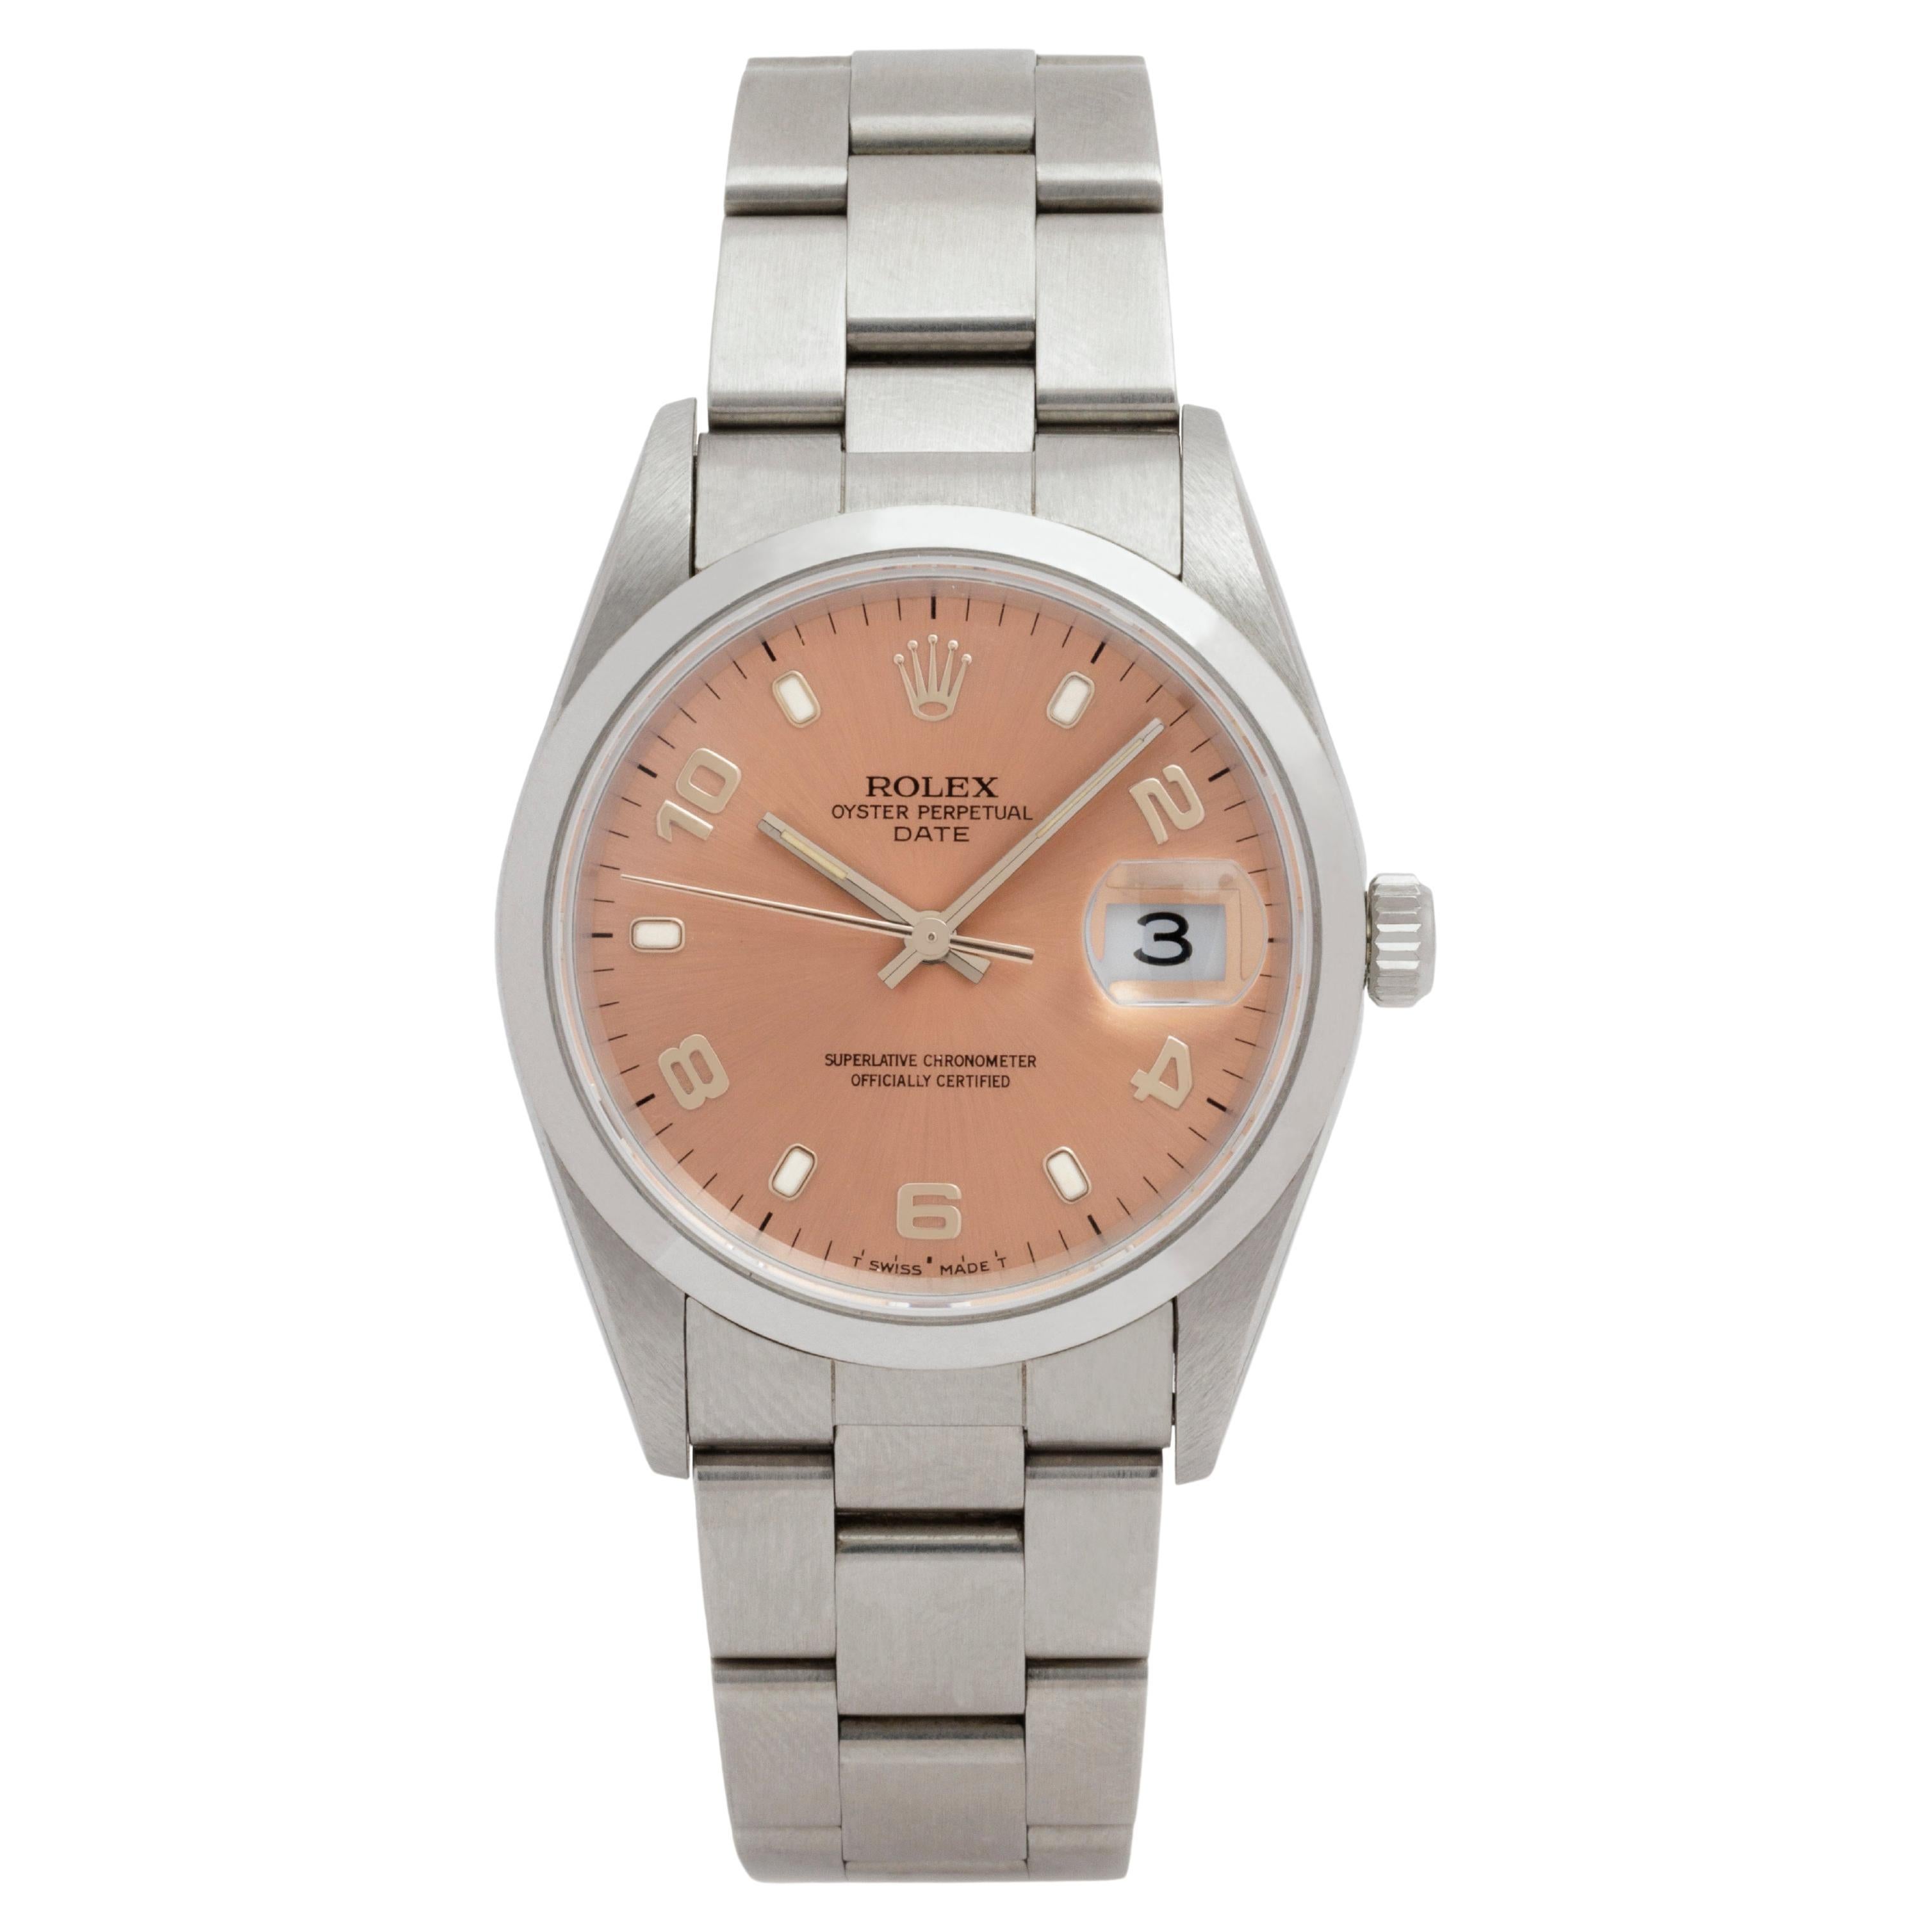 1995 Rolex Date Model 15200 Salmon Dial For Sale